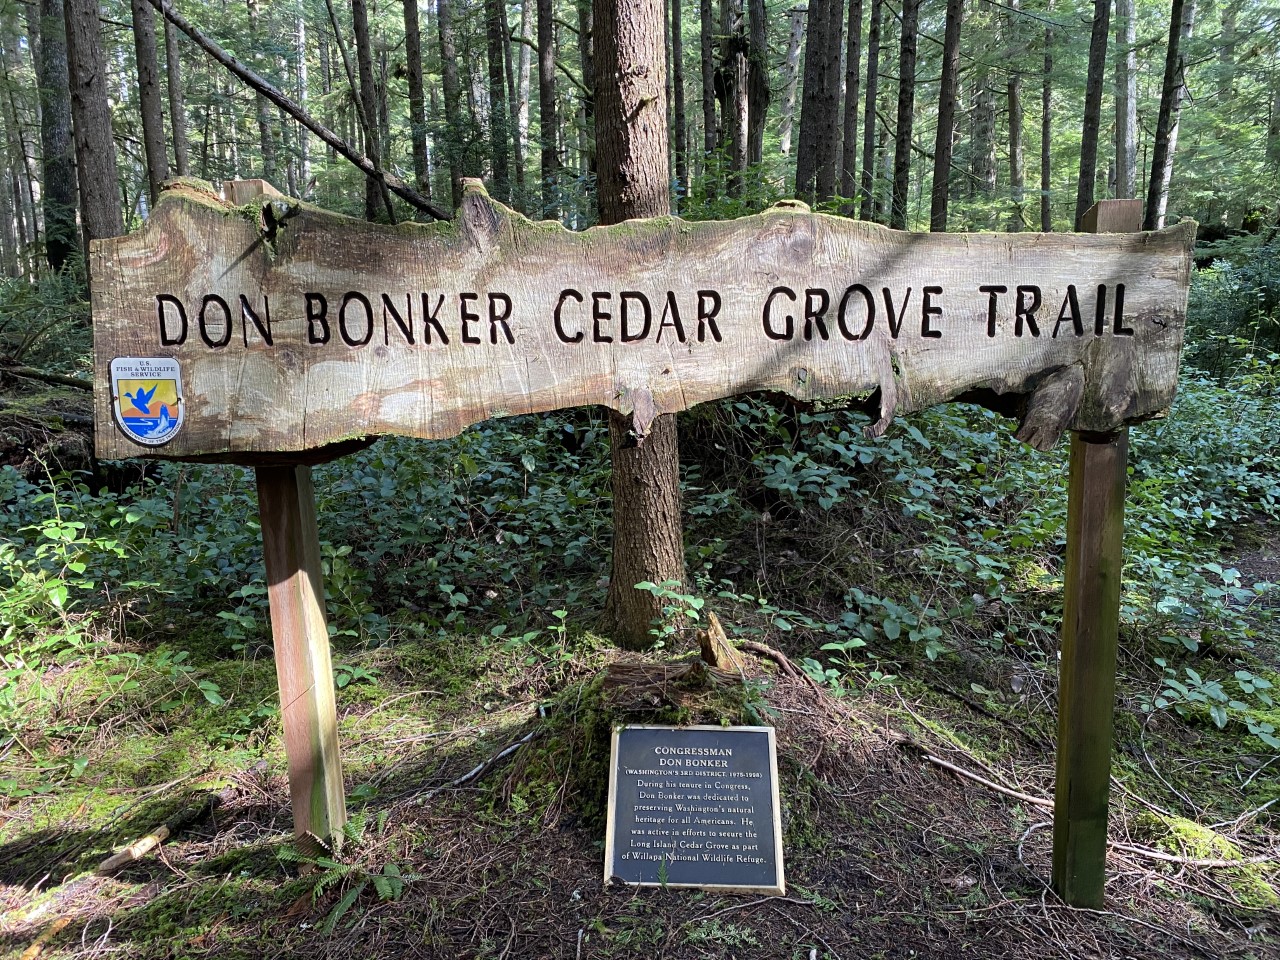 A sign saying "Don Bonker Cedar Grove Trail" with an official emblem in a green forest. A dedication plaque is sitting at it's foot.